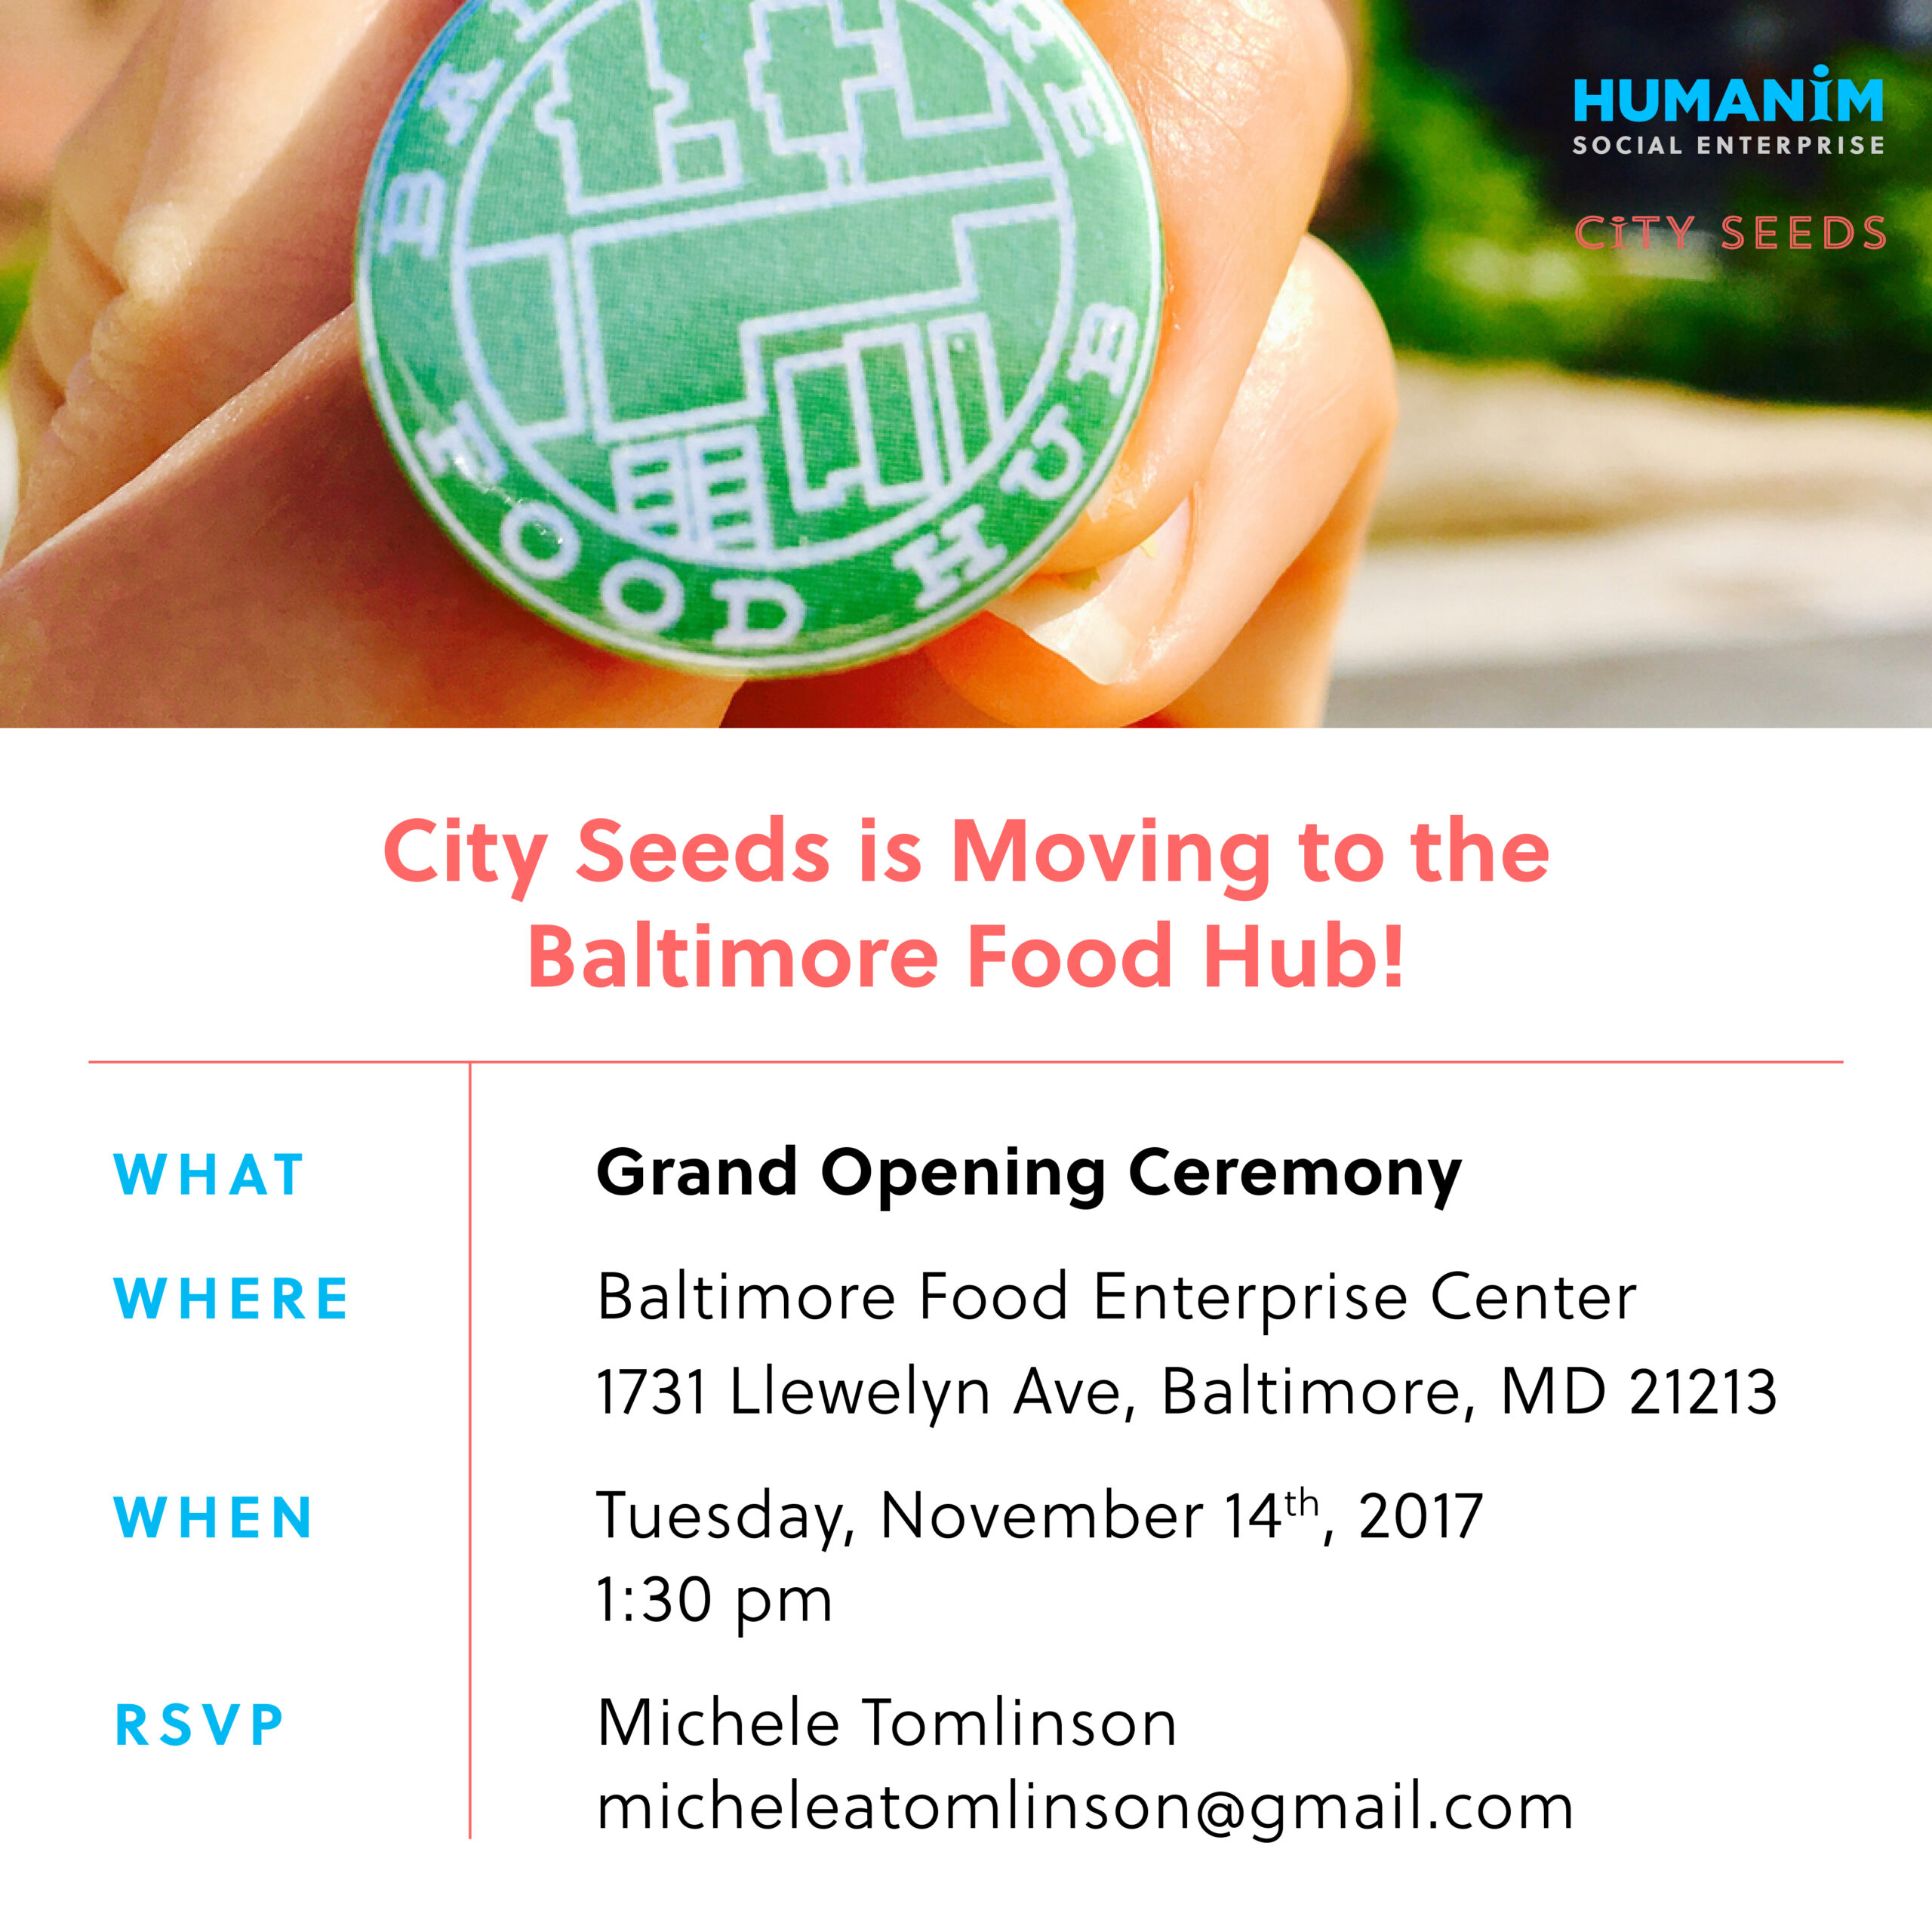 City Seeds is Moving to the Baltimore Food Hub!